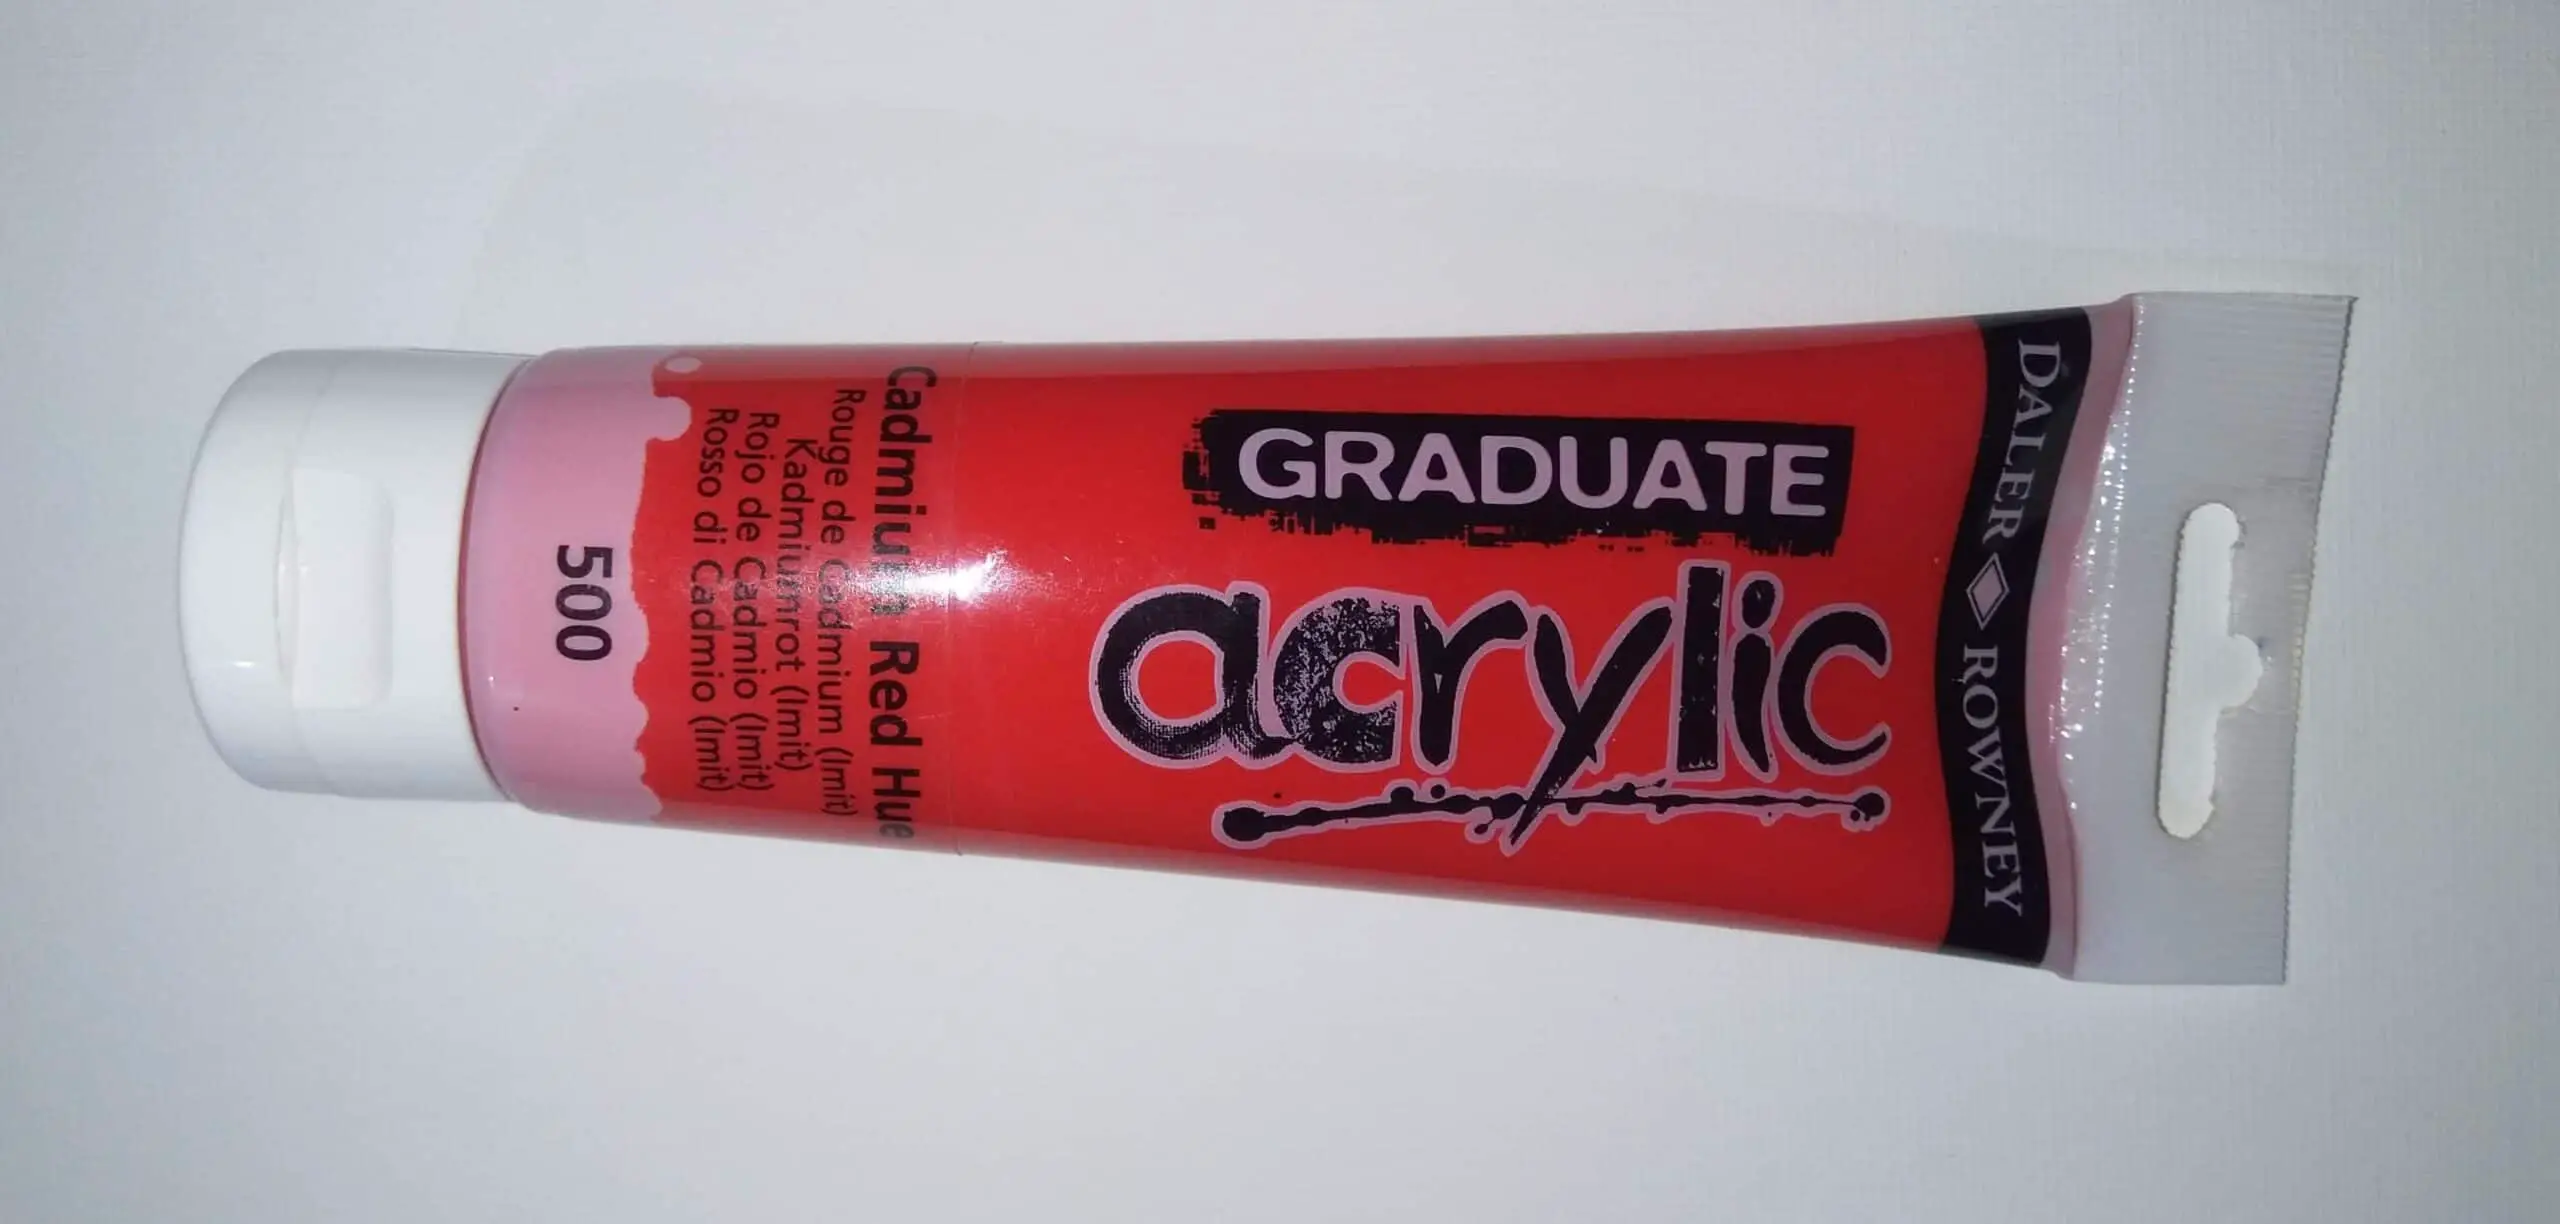 Daler Rowney Graduate Acrylics Review: Is It Good?